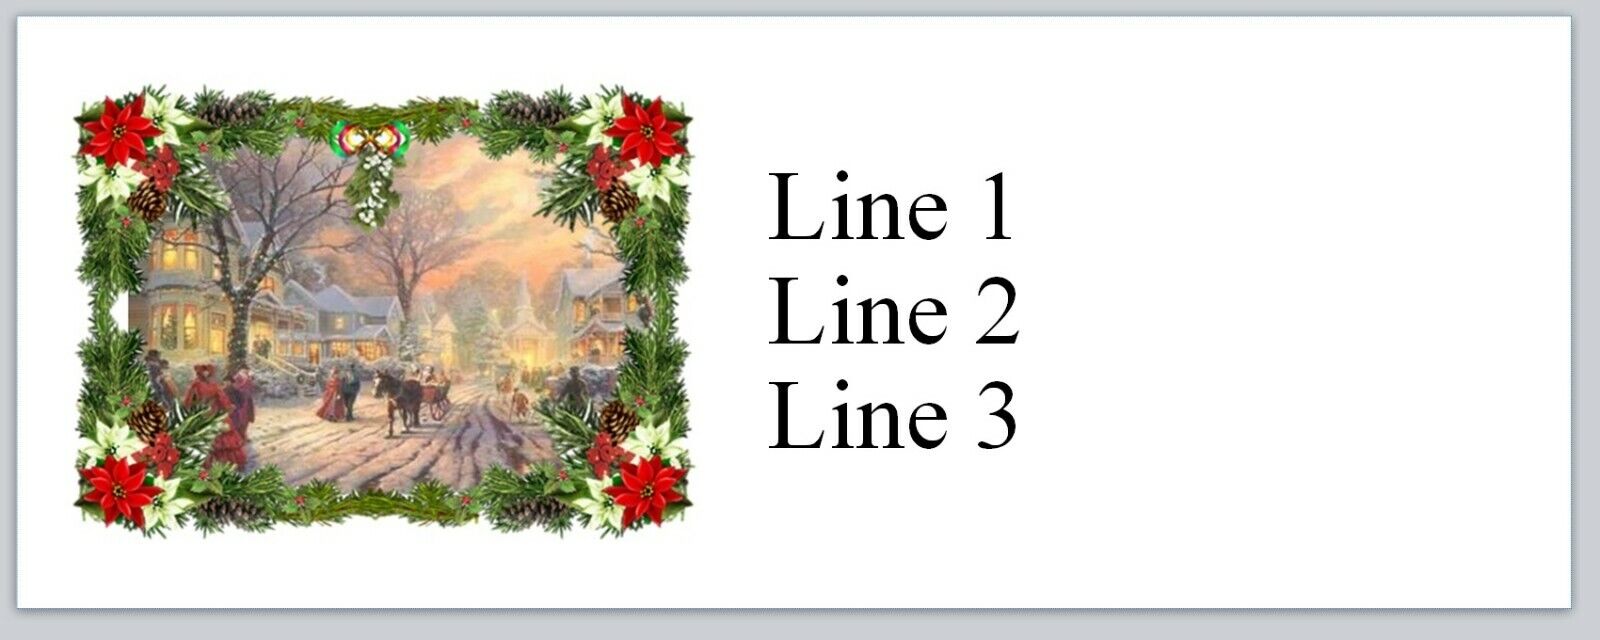 Personalized Address Labels Christmas Picturesque Scene Buy3 get1 free (jx 693)